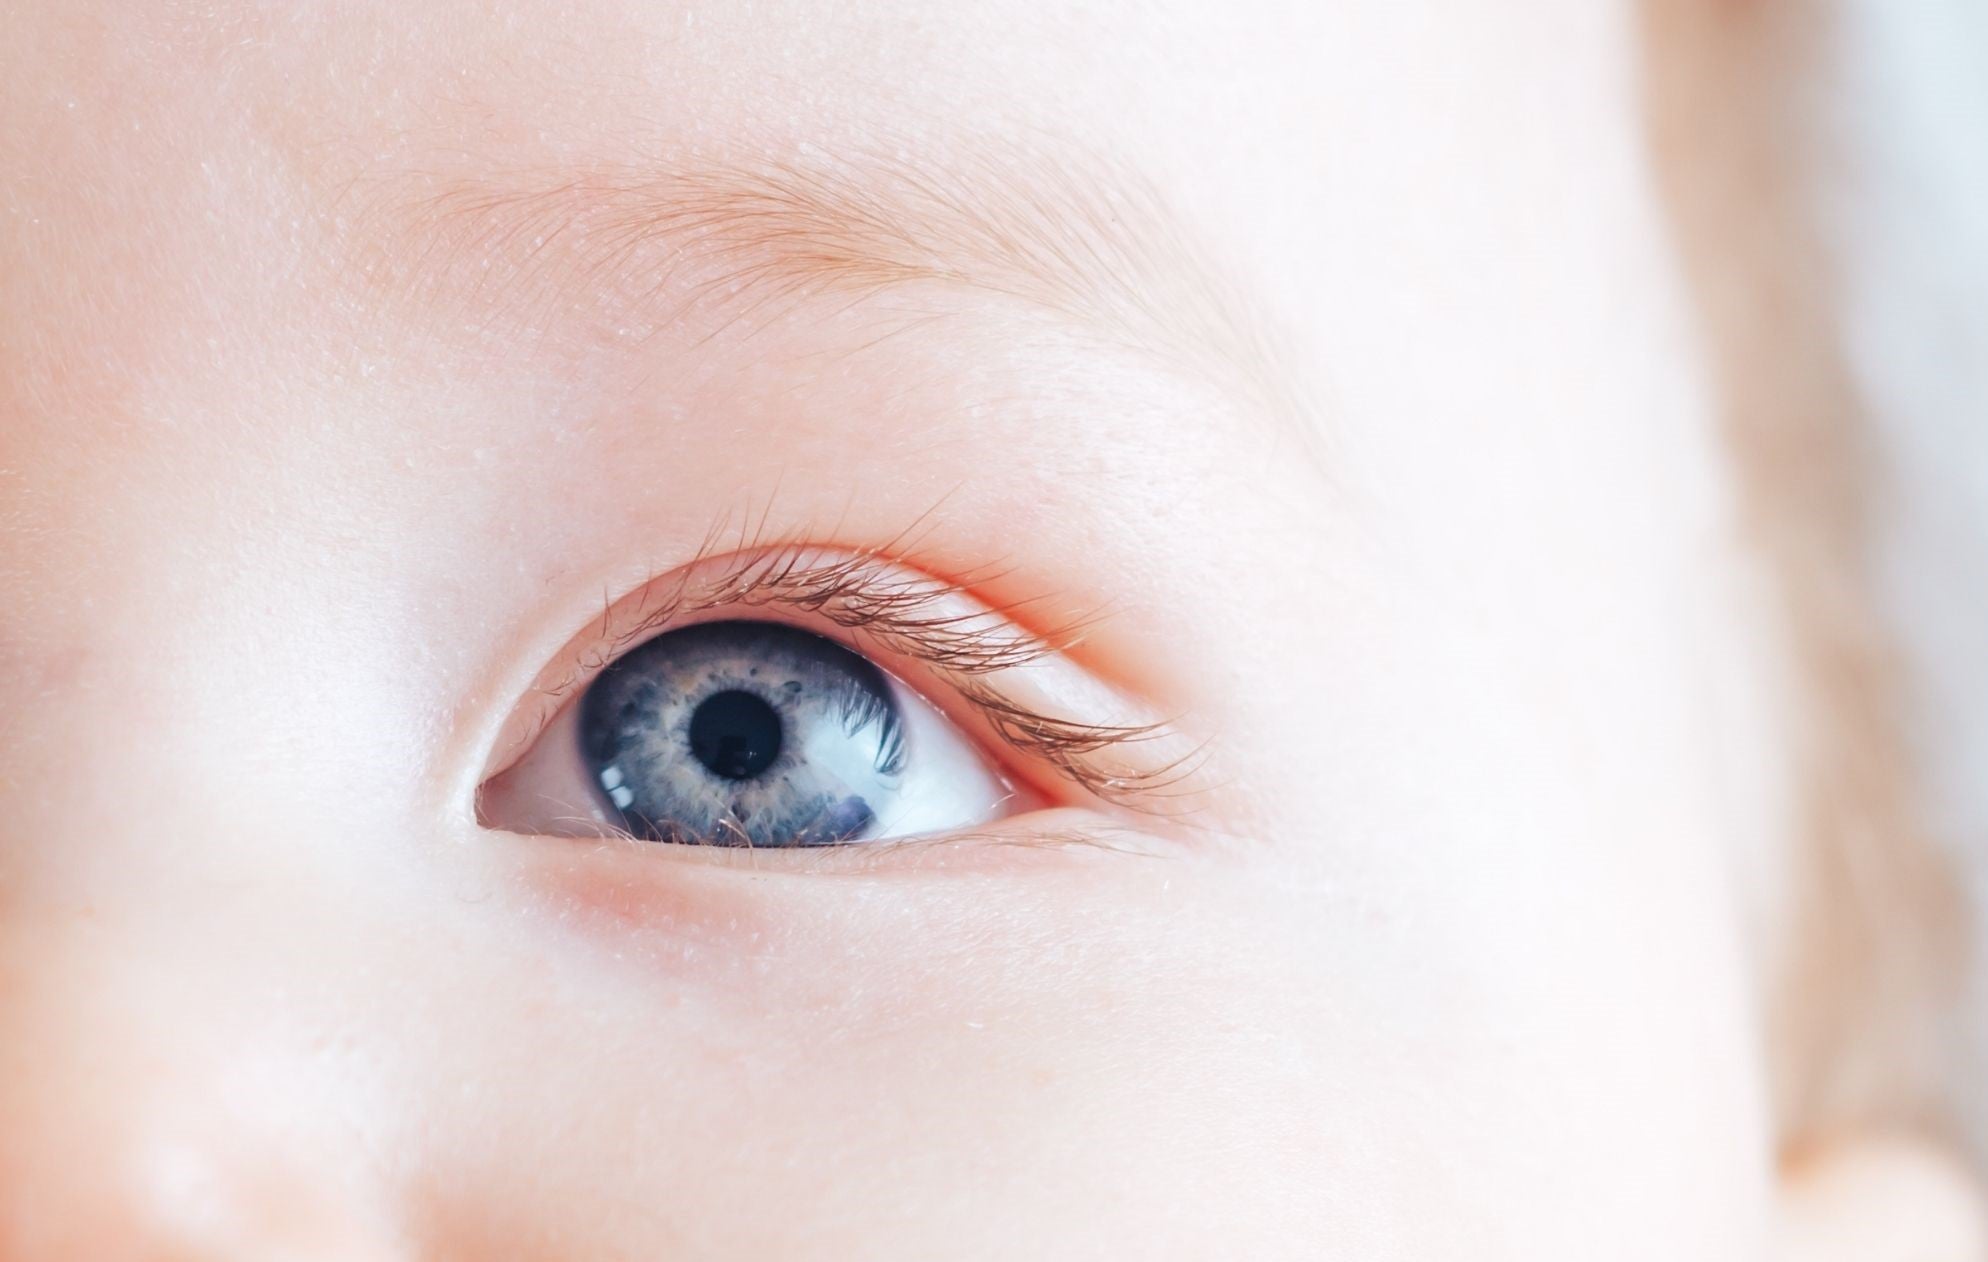 How does a baby's vision develop in their first year?